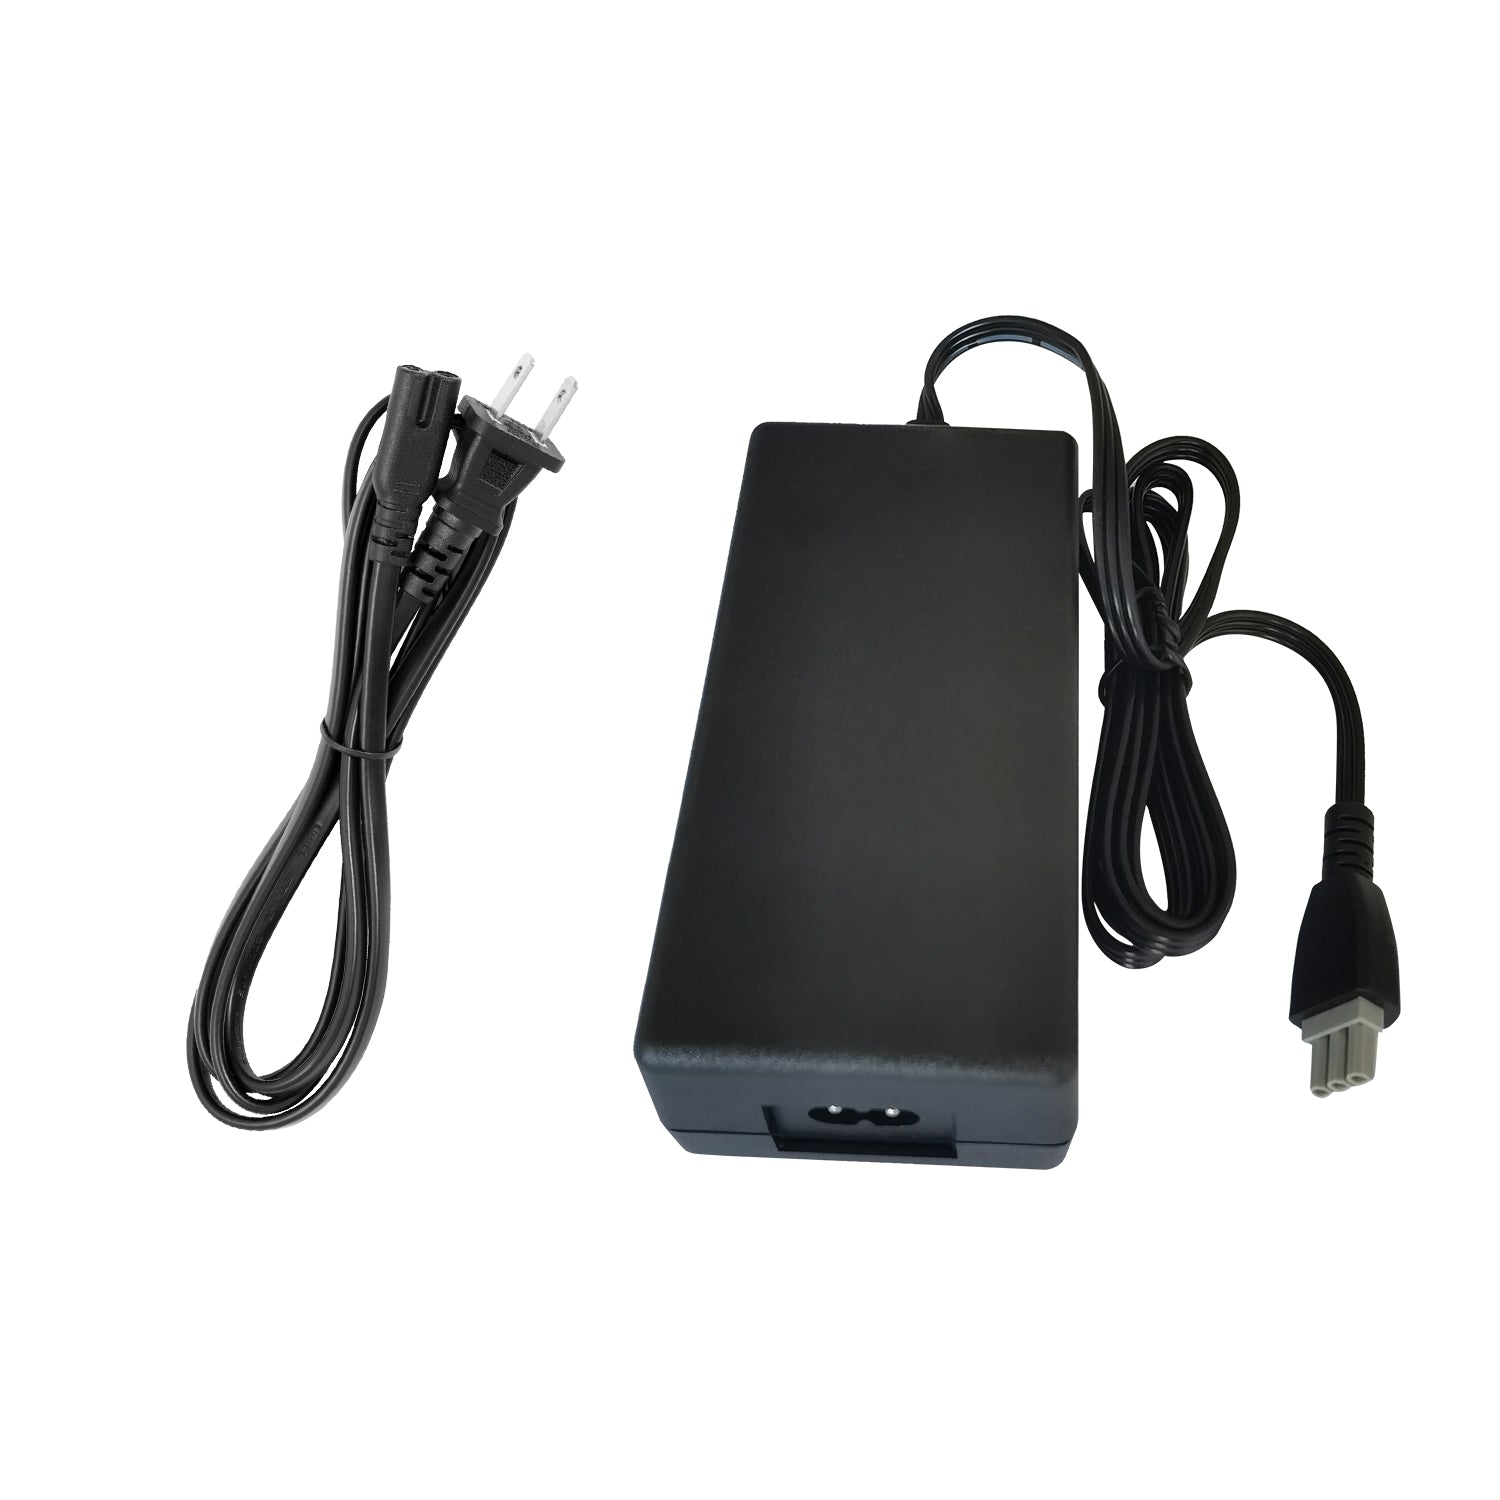 Power Adapter for hp psc 1510xi Printer.